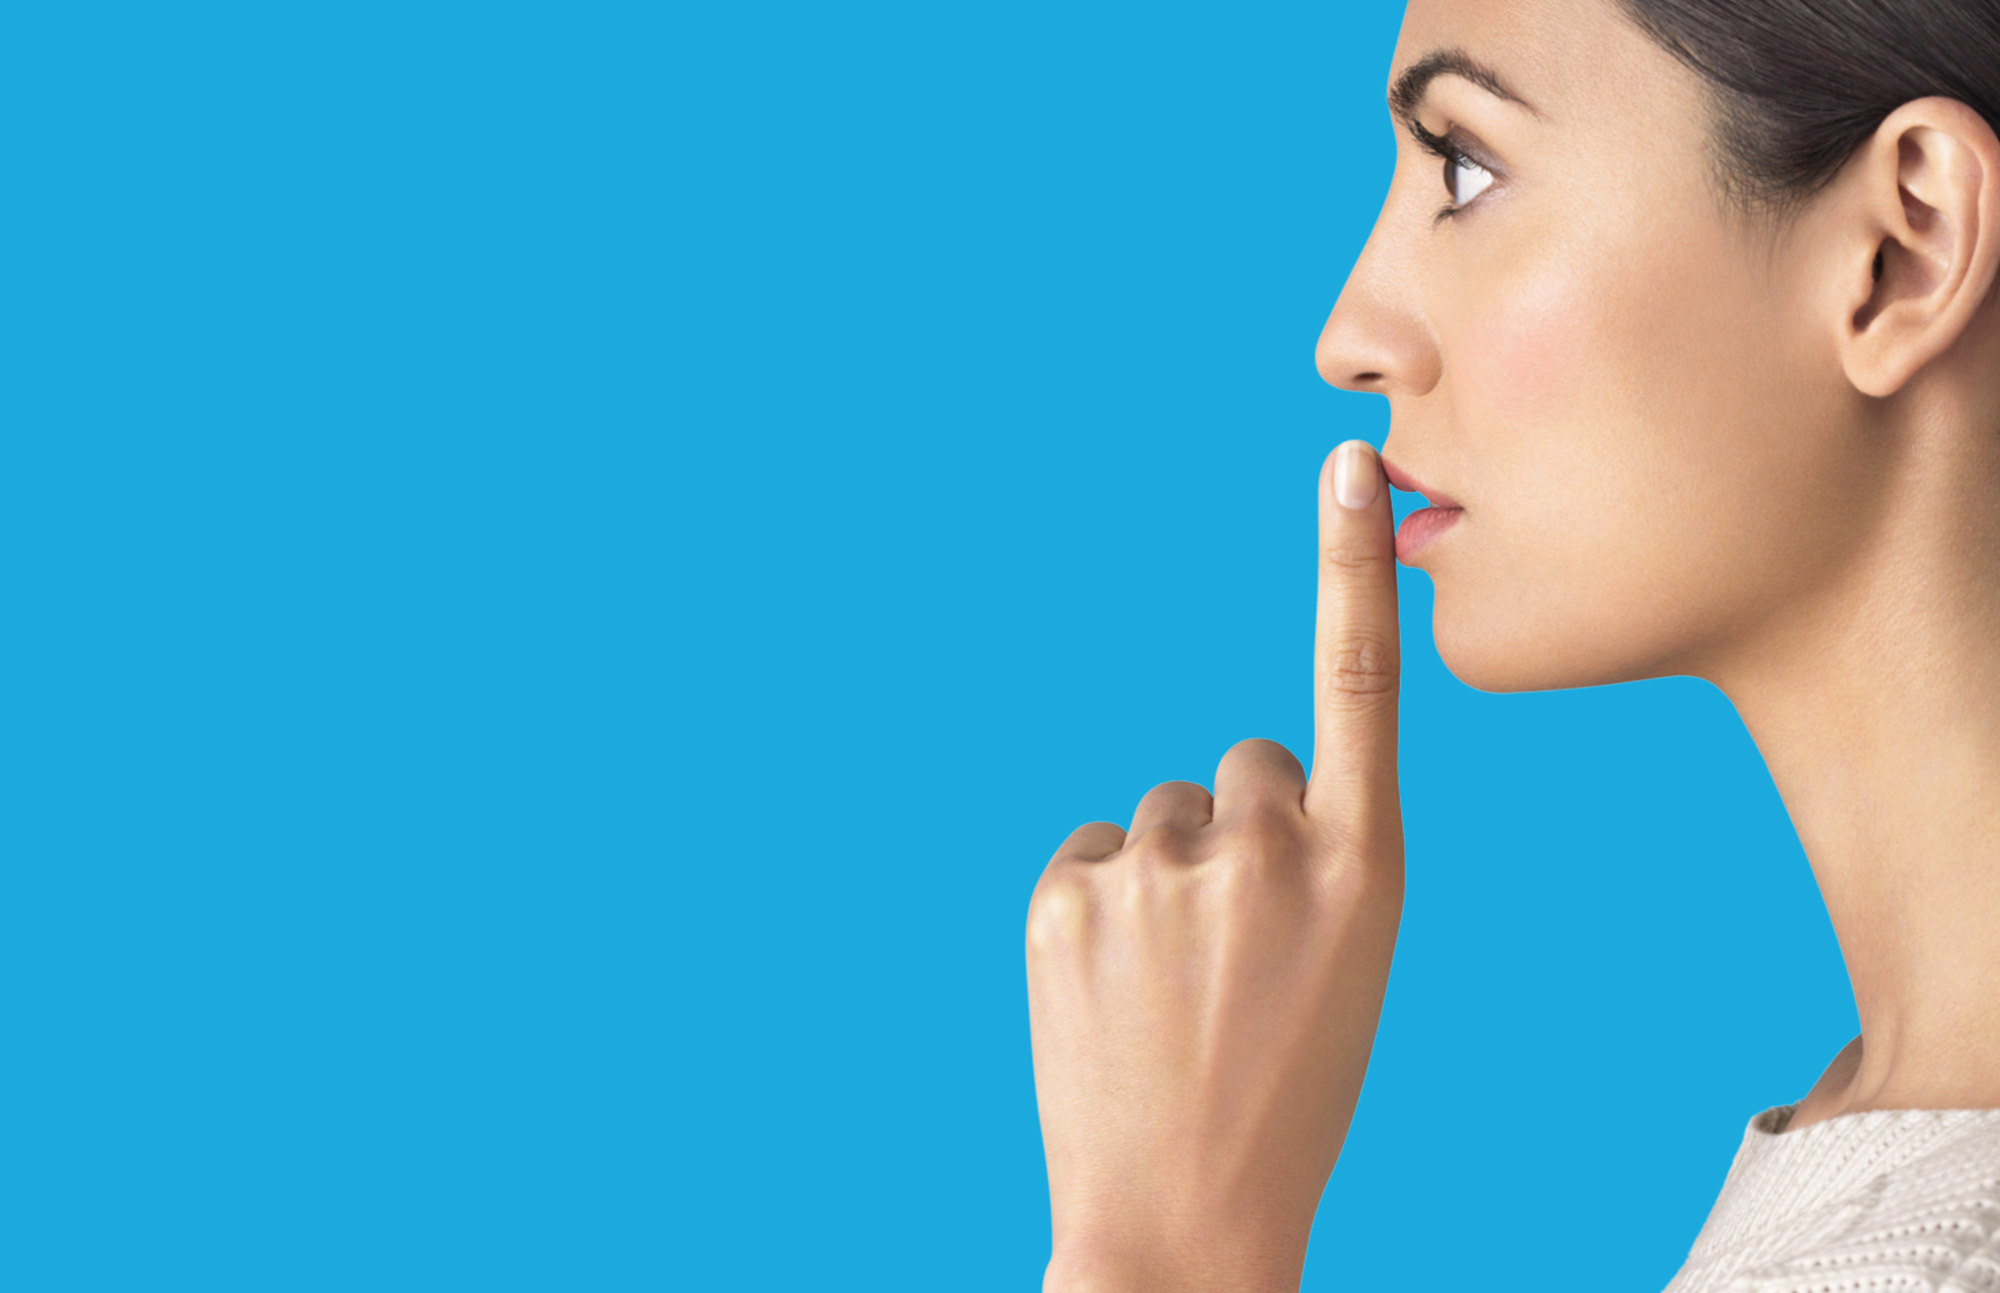 Woman placing finger on mouth to reflect silence